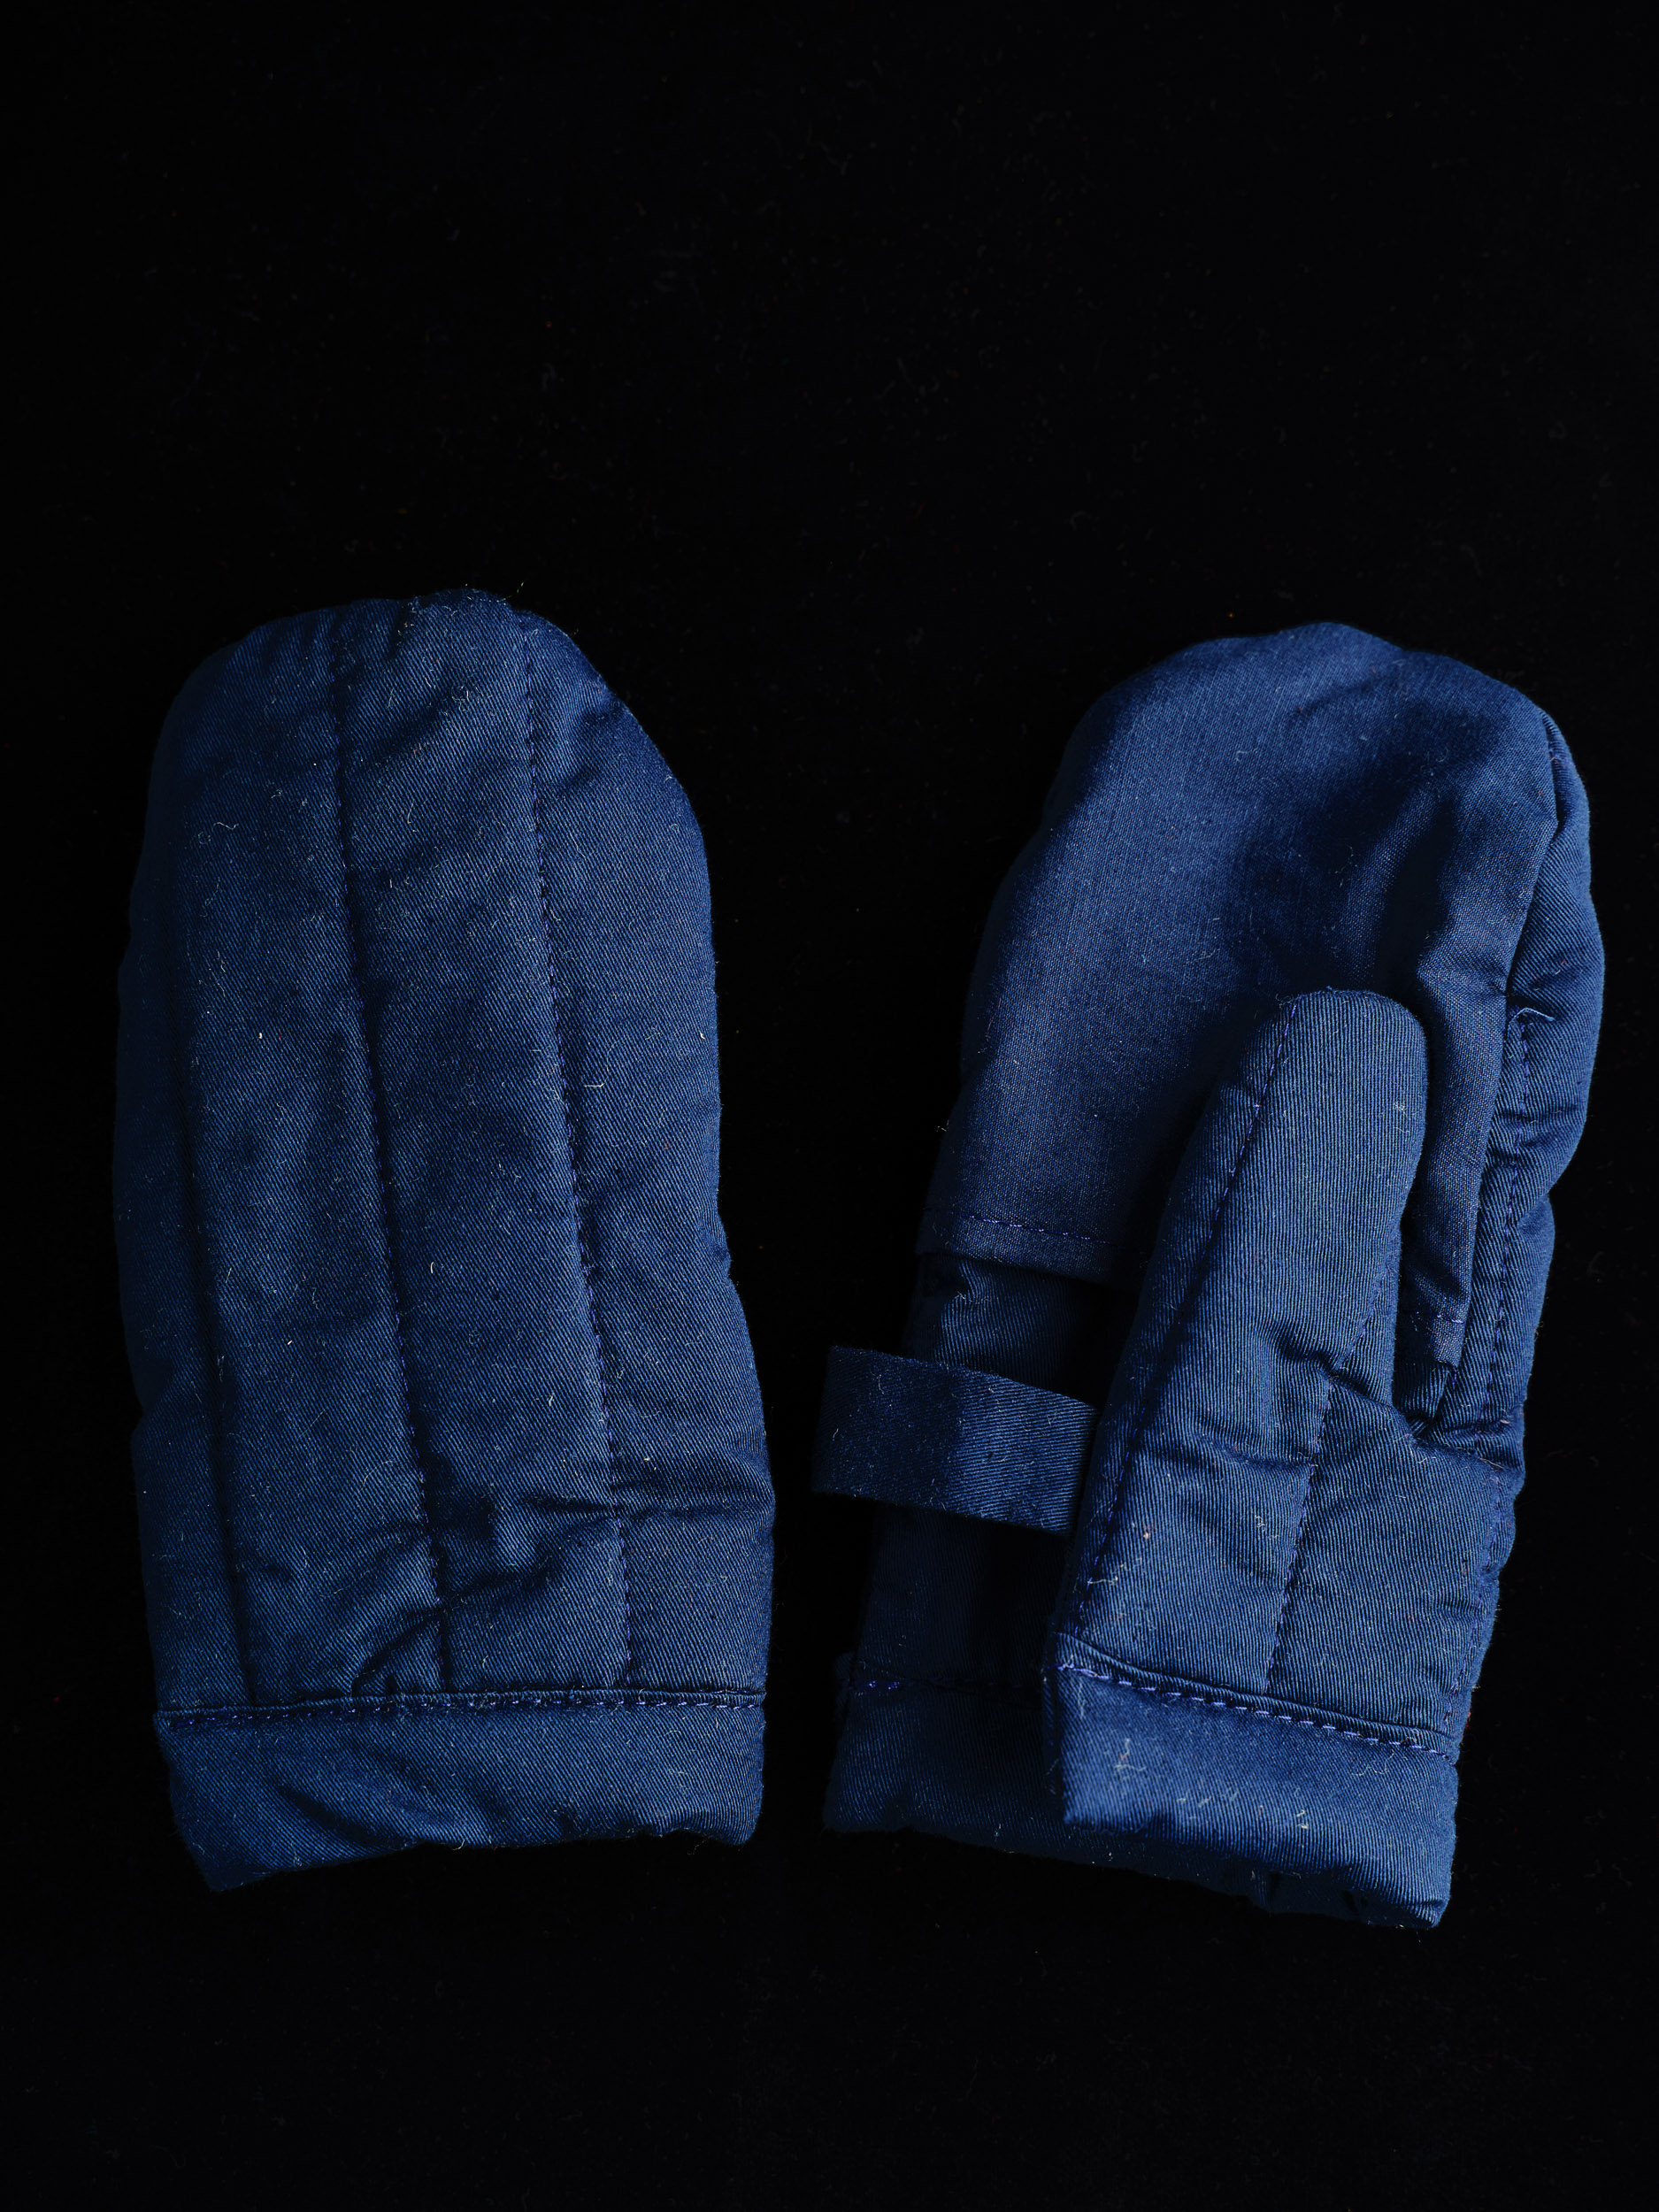 Padded mittens of XII-XIII centuries